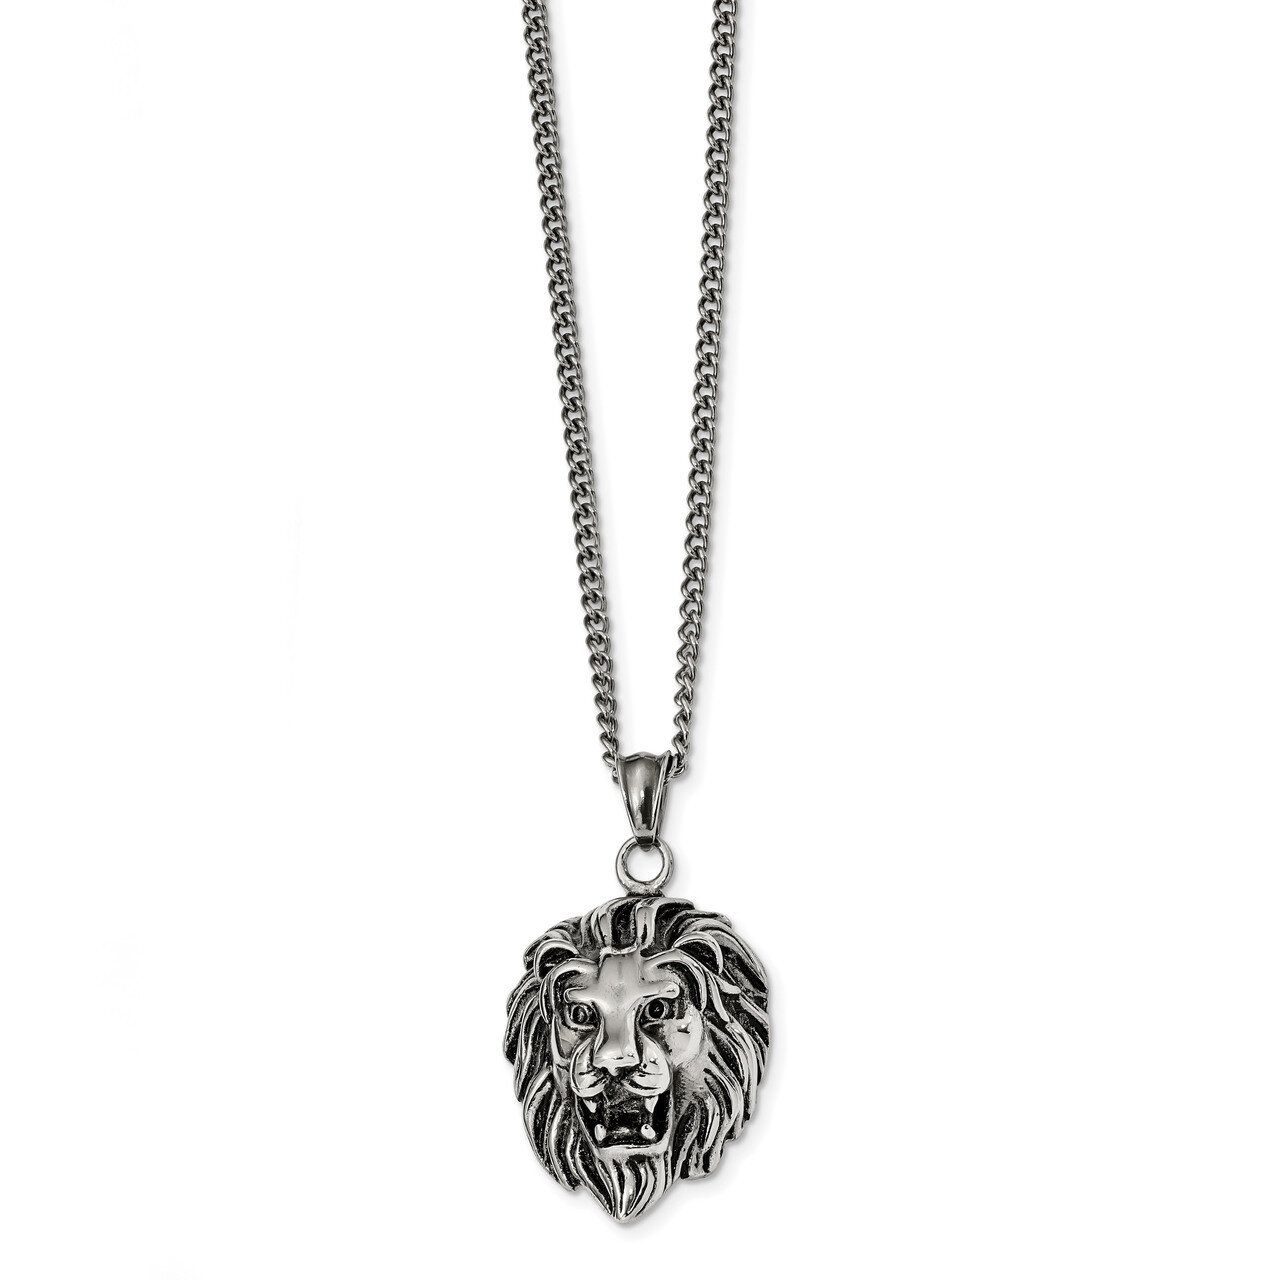 Lion Head 24 inch Necklace Stainless Steel Antiqued and Polished SRN2383-24